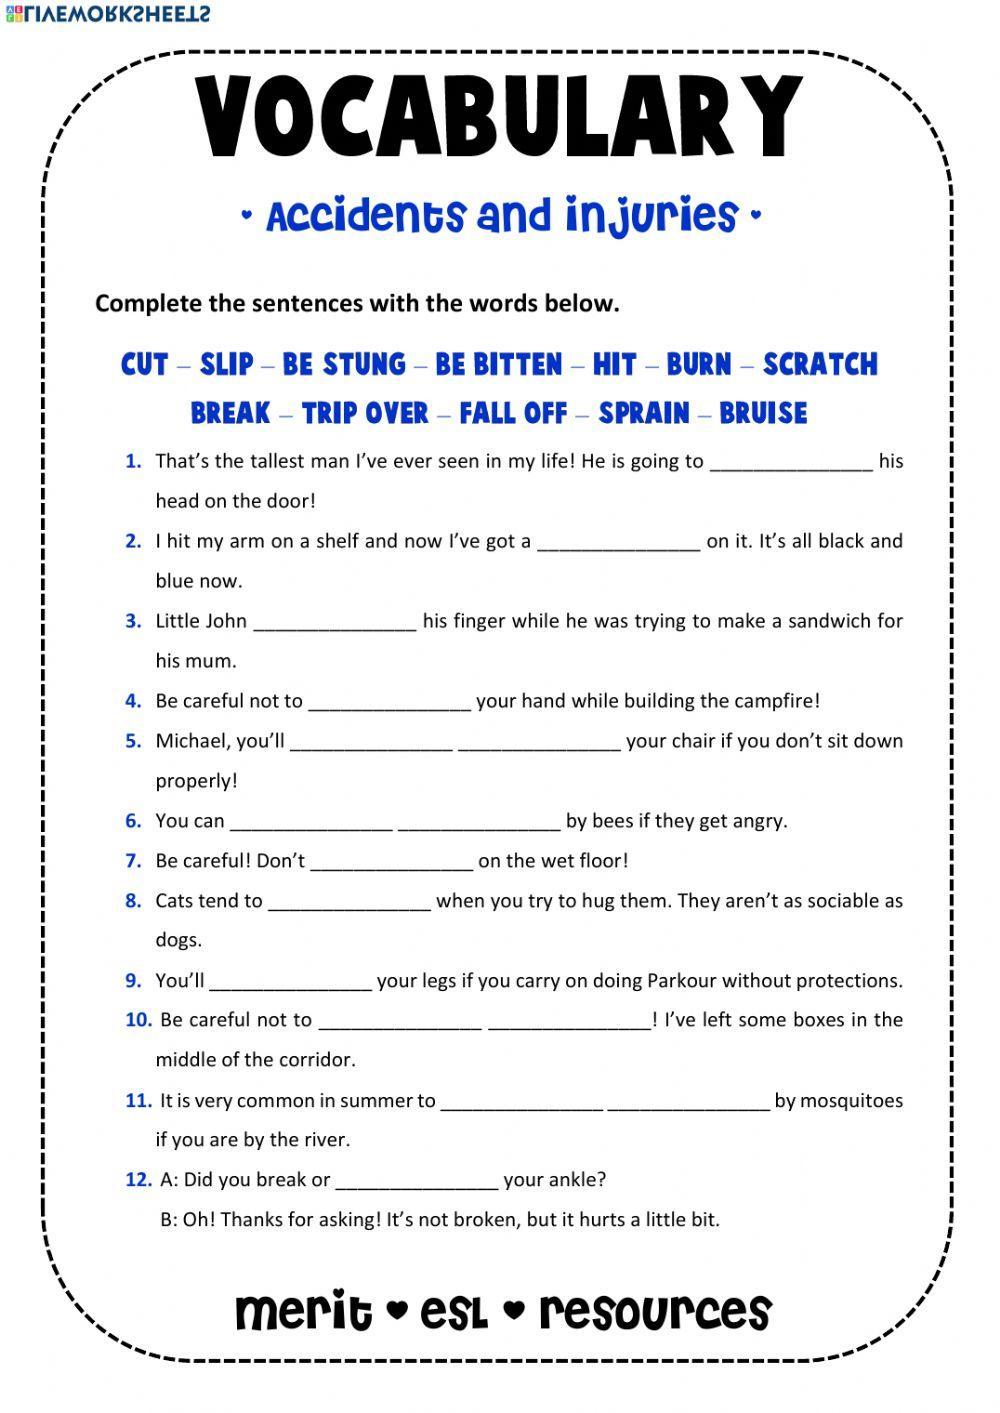 Vocabulary - Accidents and Injuries